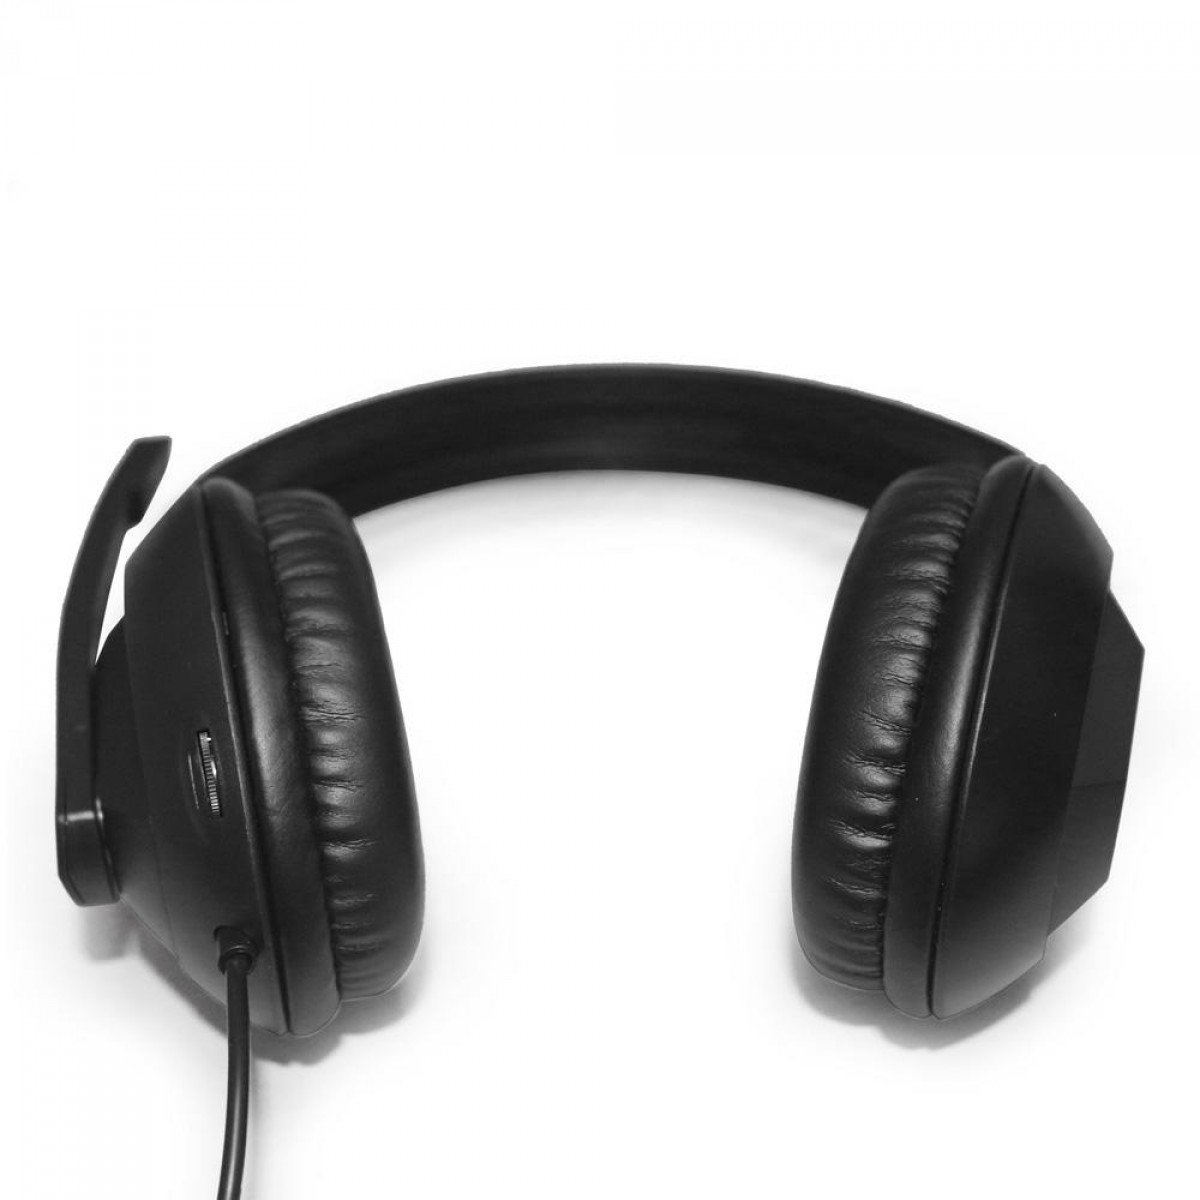 Headset Multilaser Office, P3, Stereo, Drivers 40mm, Black, PH373